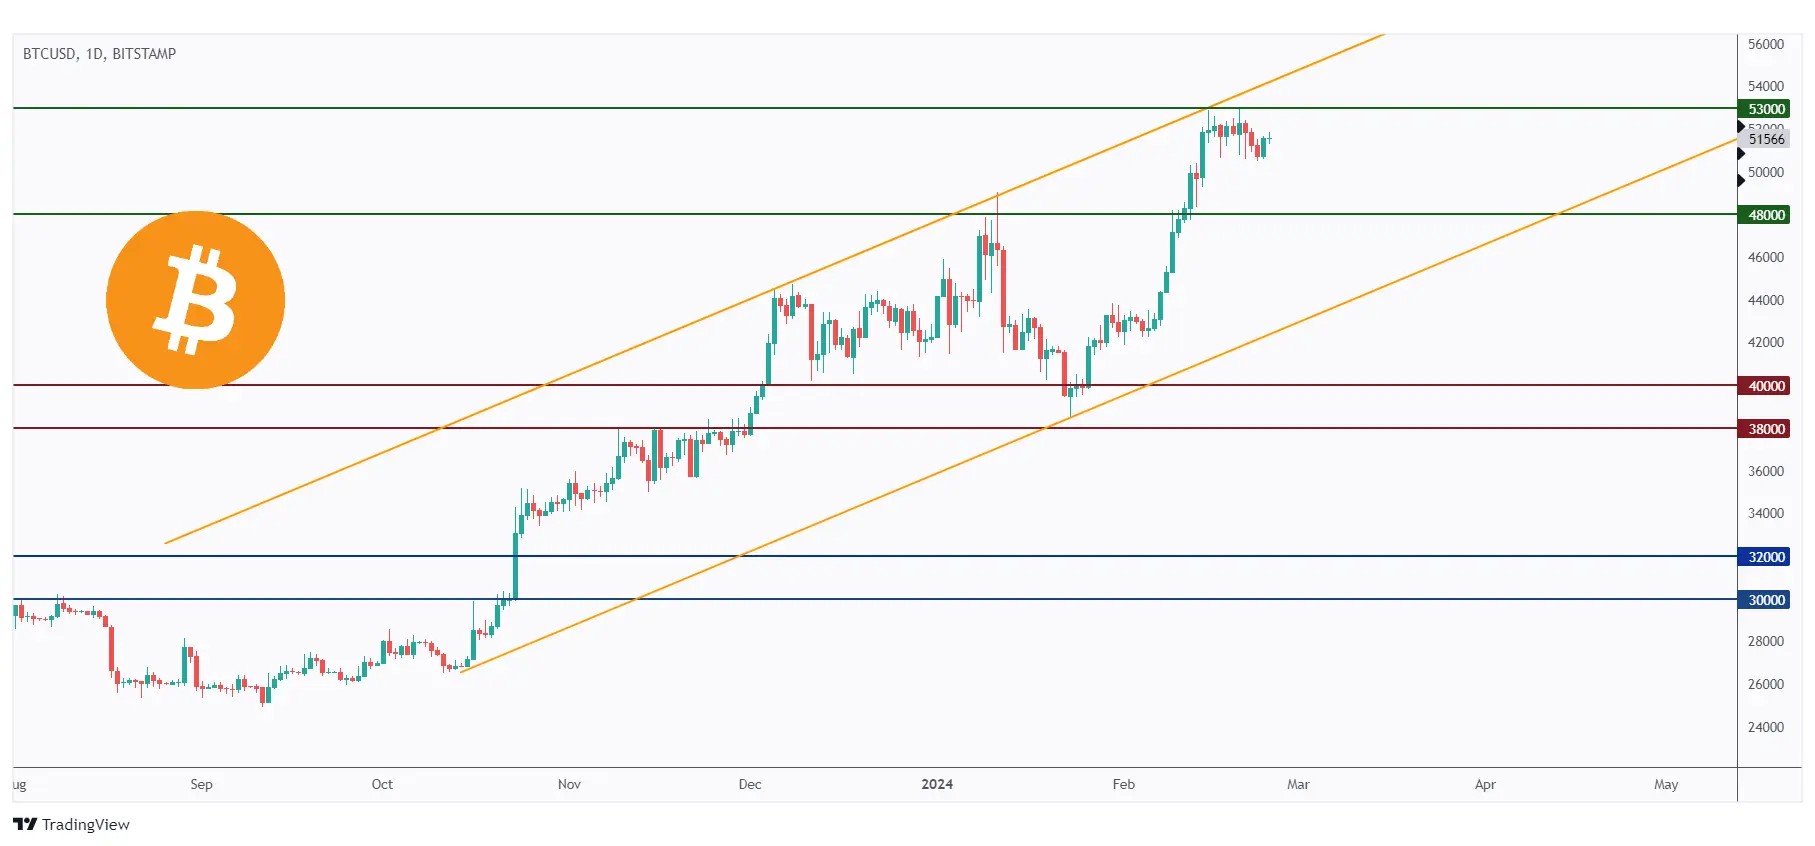 BTC daily chart hovering around the upper bound of the rising channel and $53,000 mark.